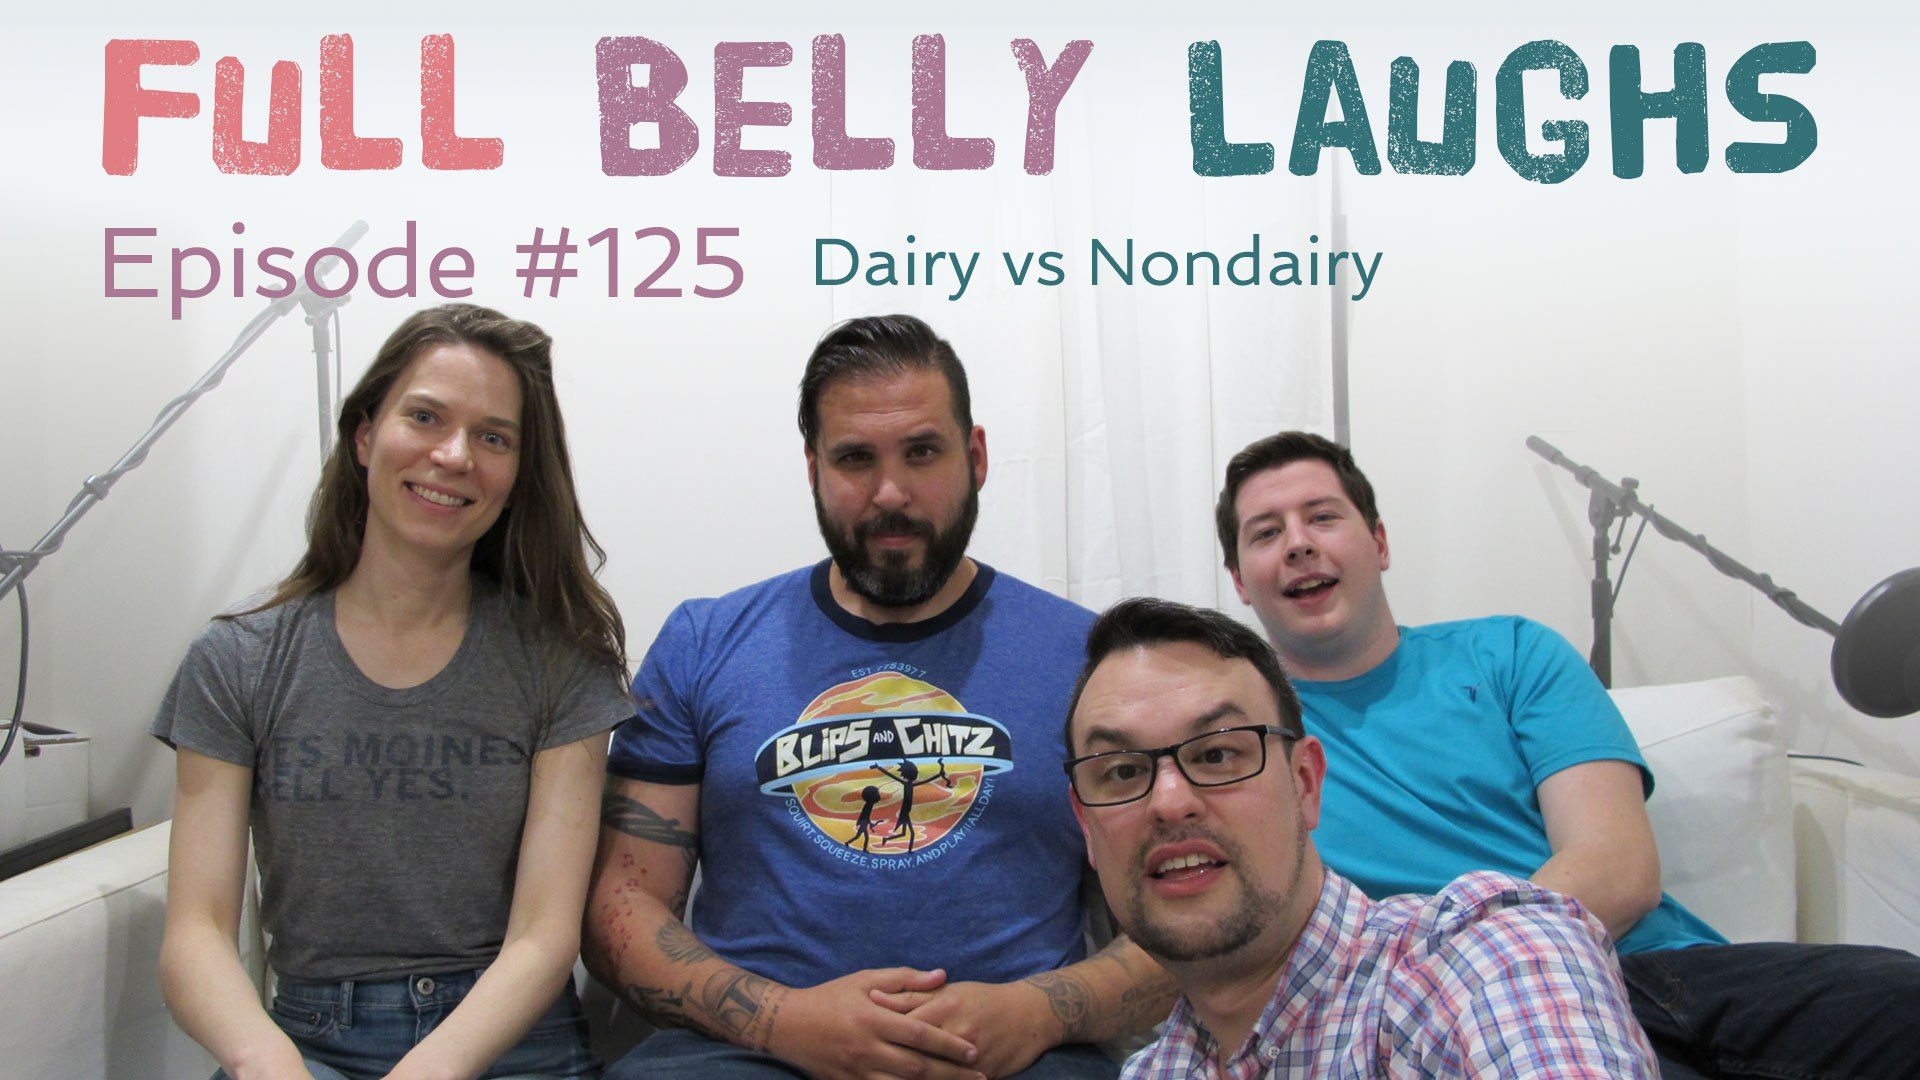 full belly laughs podcast episode 125 dairy vs nondairy audio artwork